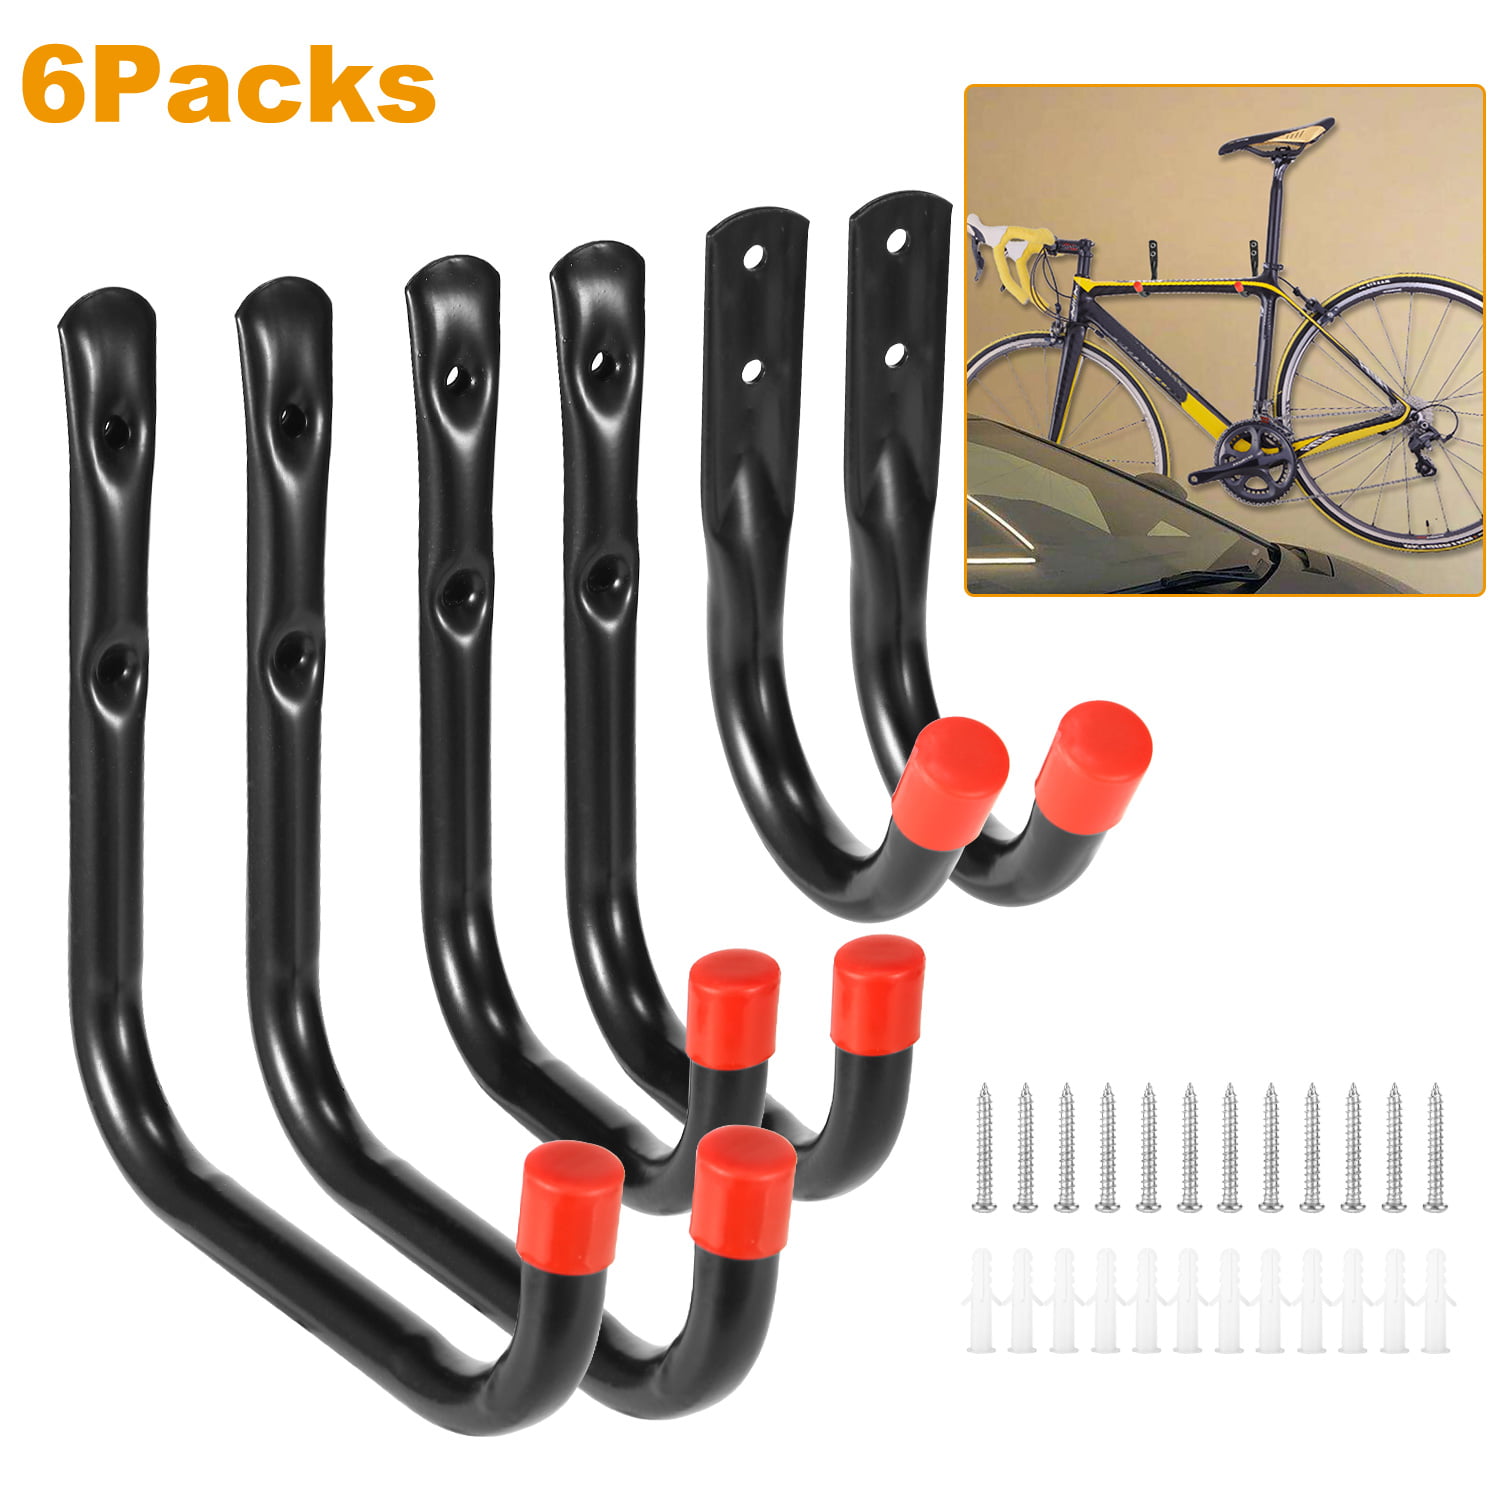 Bike Storage Hook Solutions Wall Hooks Heavy Duty for Bikes Ladders and Power Tools Heavy Duty Bike Storage Hooks 6 Pieces Large Screw Hooks for Garage Wall and Ceiling Bicycle Mount